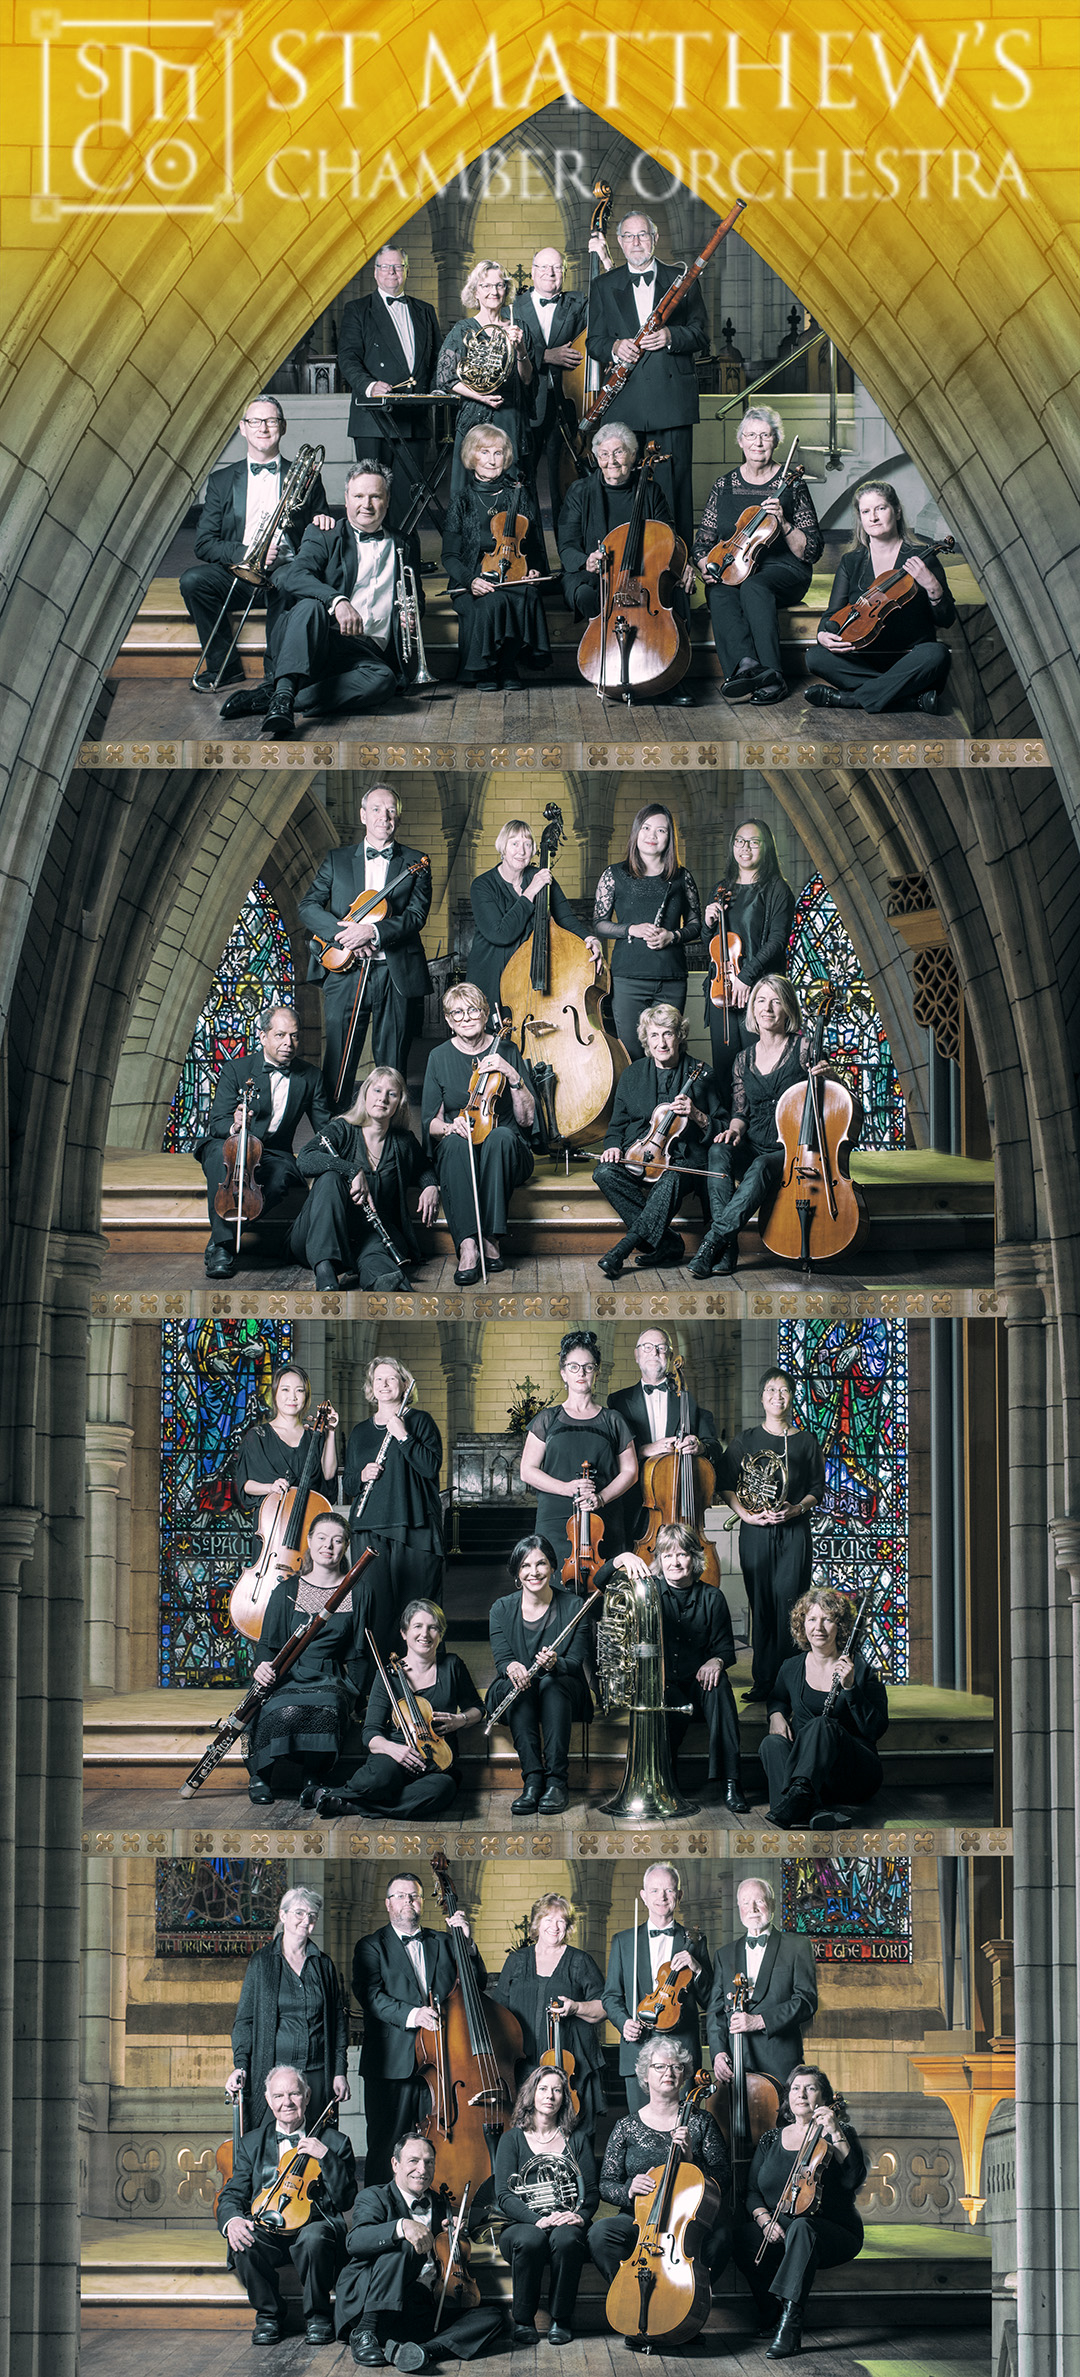 Group portrait of the St. Matthew's Chamber Orchestra